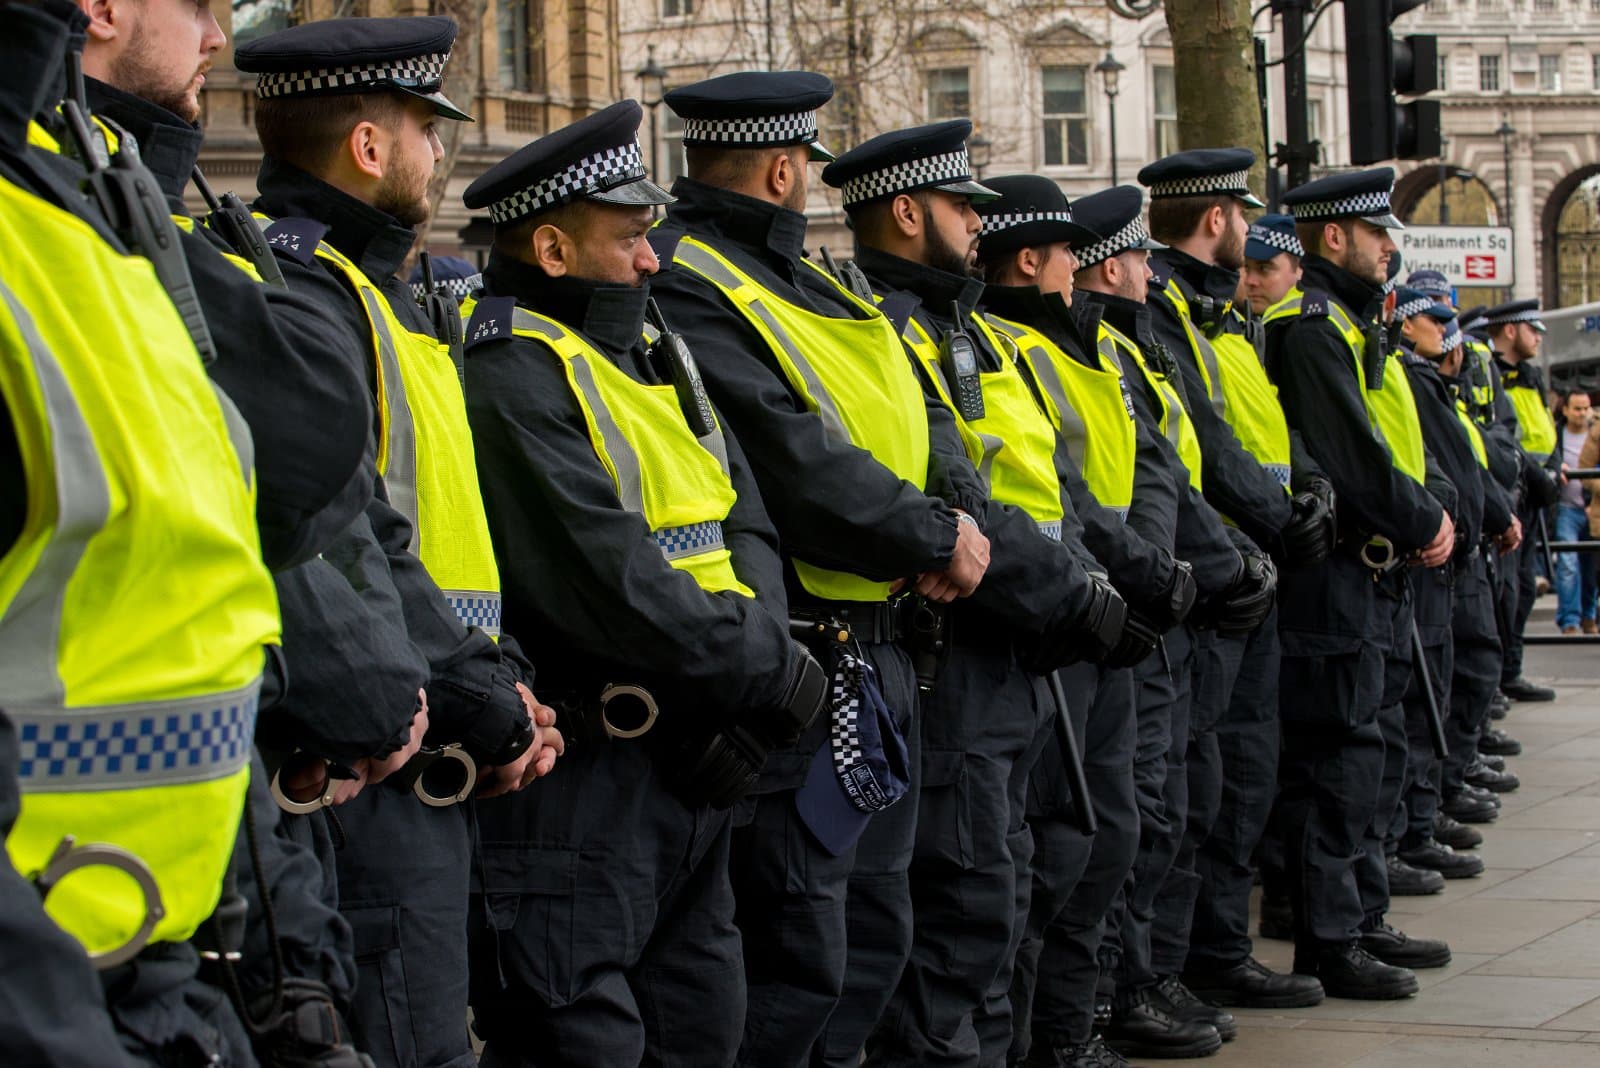 Image Credit: Shutterstock / John Gomez <p><span>The debate surrounding mass protests in London is indicative of the delicate balance between upholding civil liberties and maintaining public order. </span></p>